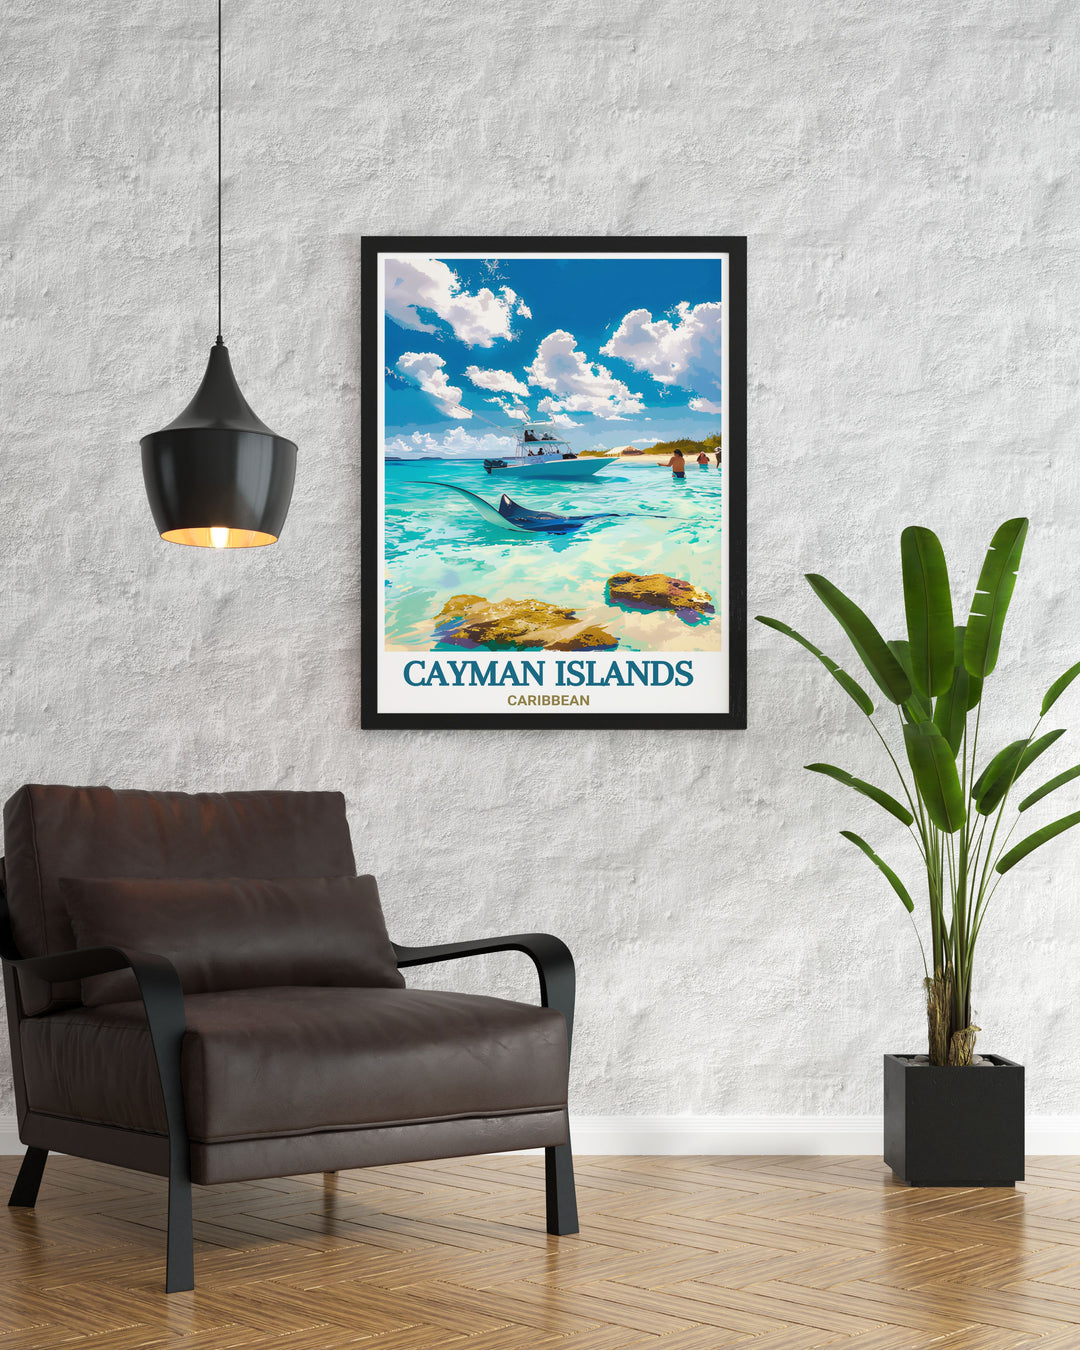 Stunning Stingray City prints showcasing the natural beauty of the Cayman Islands available as a modern art piece or framed print perfect for those who appreciate sophisticated travel posters and unique wall art